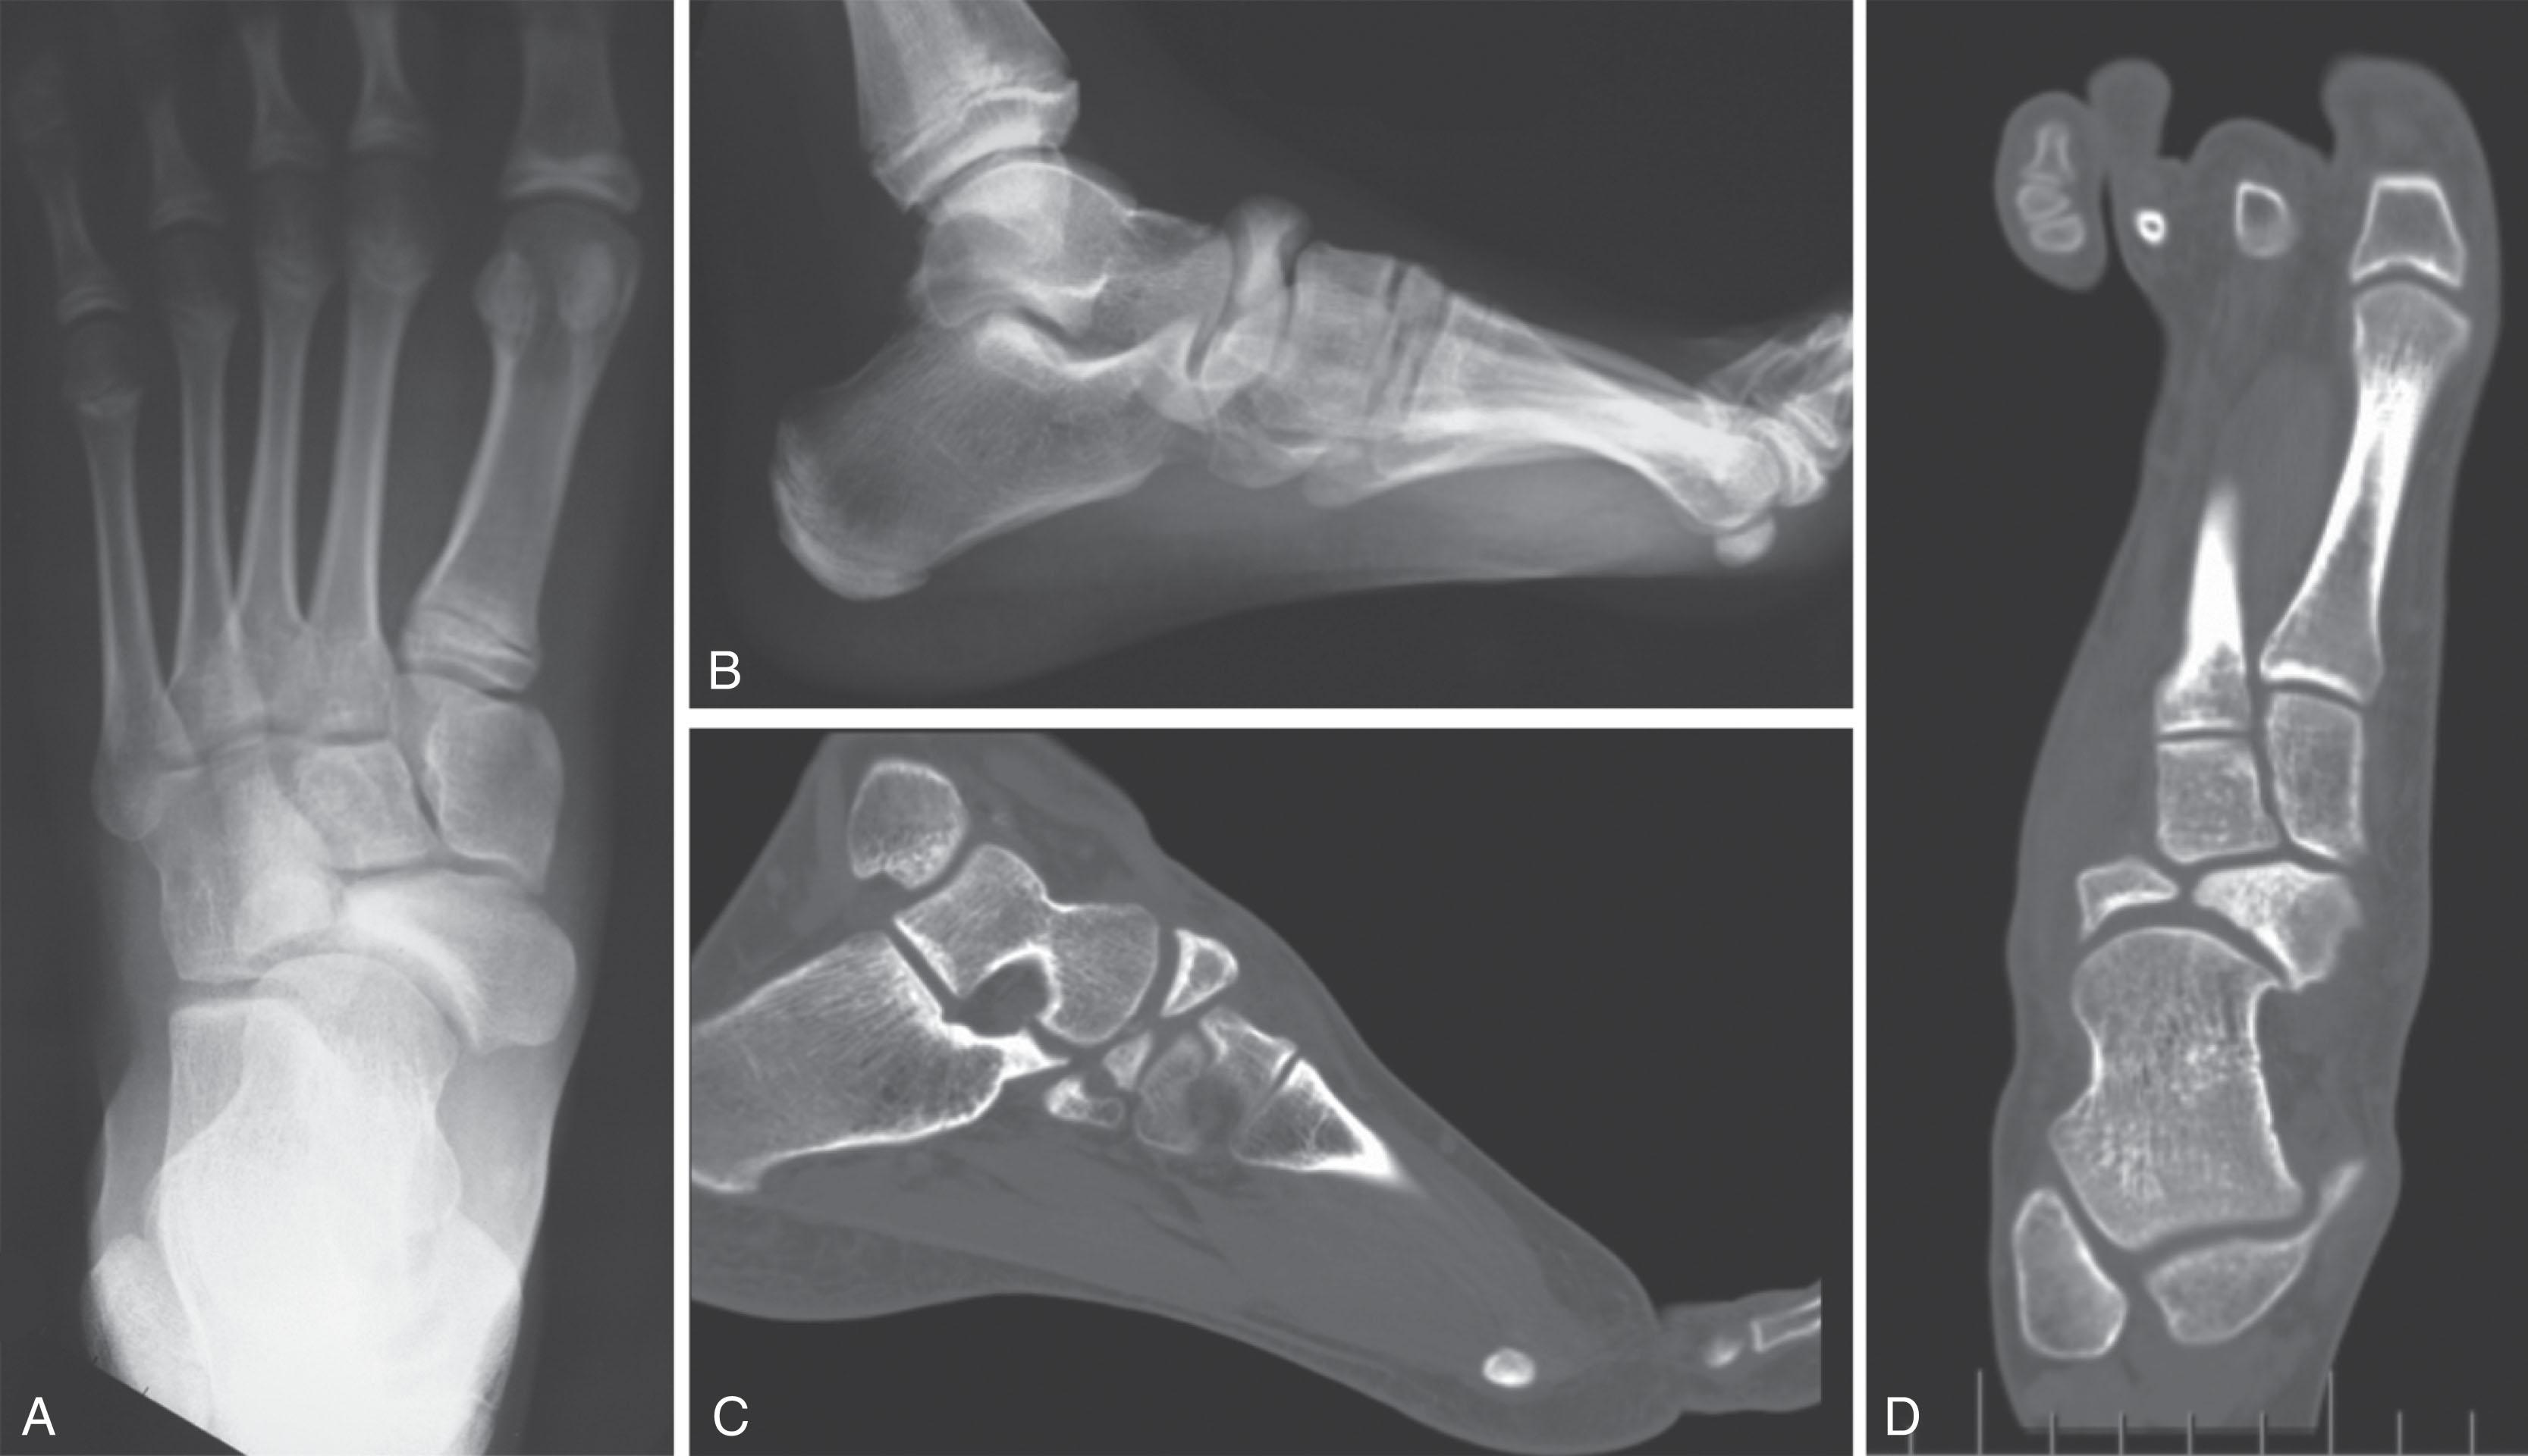 Fig. 47-9, A and B , Anteroposterior and lateral radiographs of a patient with a bipartite navicular. Note the comma-shaped appearance and the dense sclerosis, indicating the chronic nature of the radiographic findings. C and D , A single sagittal computed tomography scan slice of the same patient, followed by a single representative axial slice. Again note the well-corticated edges of the bipartite navicular, in contradistinction to Fig. 47-10 , which shows an acute stress fracture.